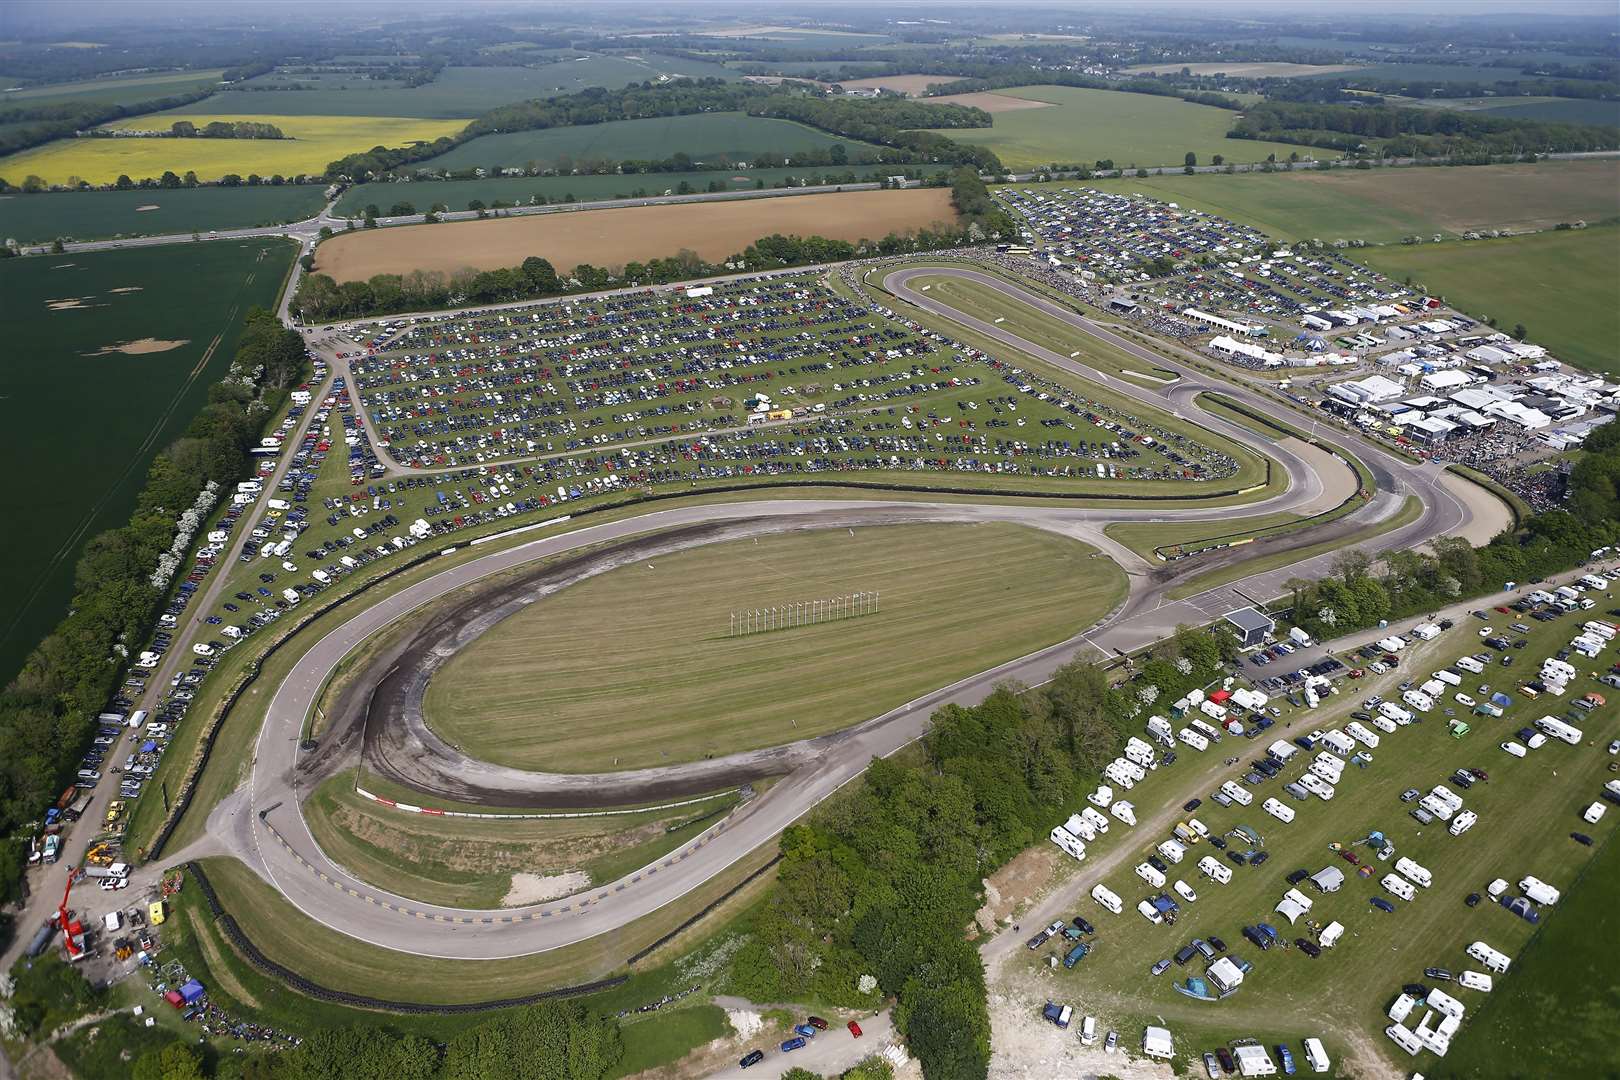 Lydden Hill full to capacity. FIA World Rallycross round 4. Lydden Hill Race Circuit, Wooton. Picture: Matt Bristow FM4360479